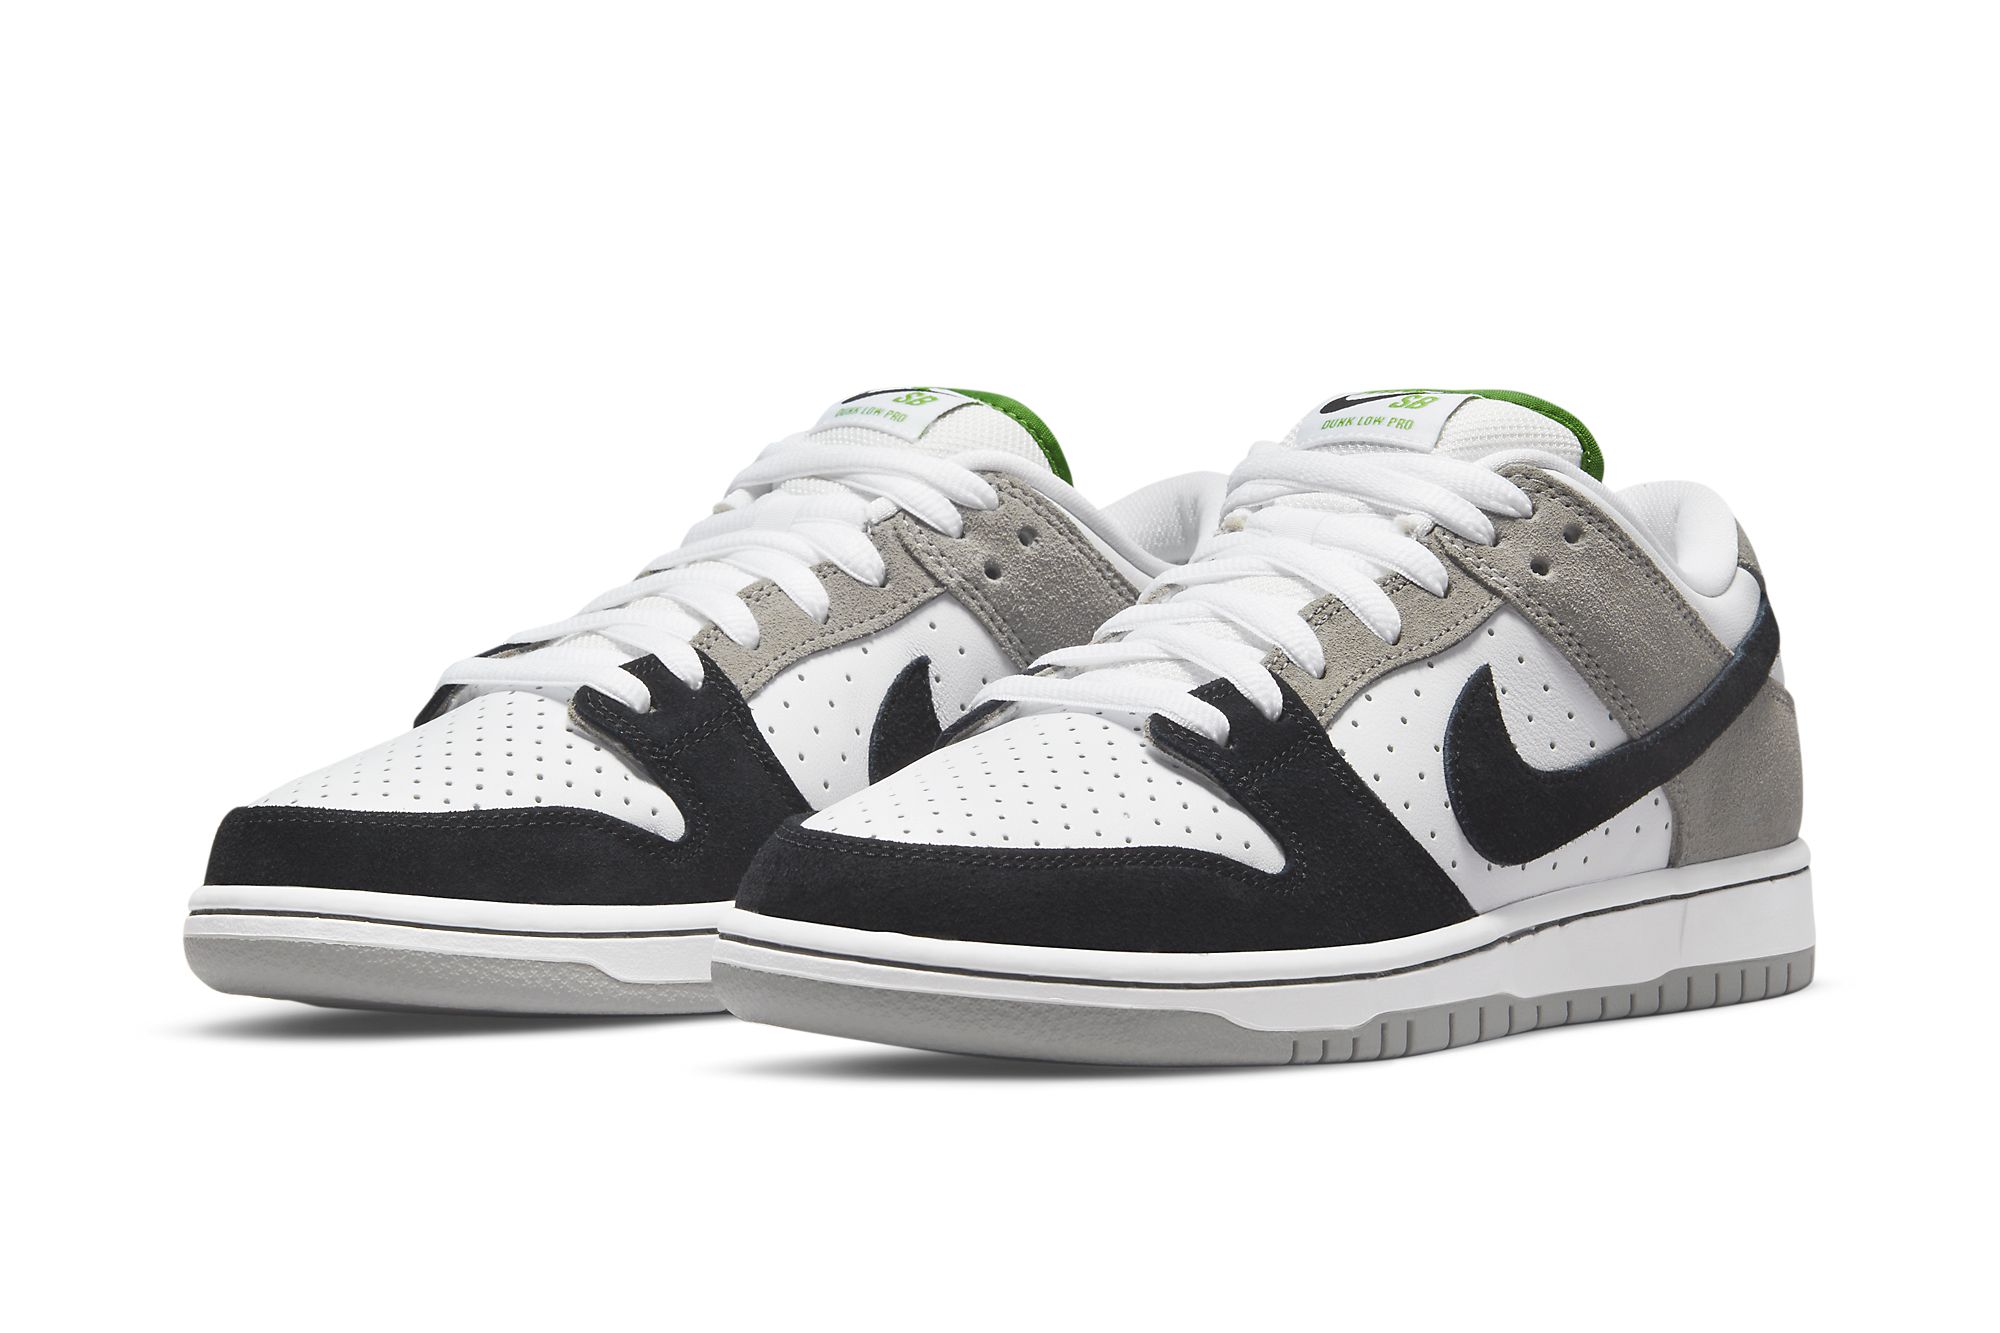 Nike SB Dunk Low 'Chlorophyll' Official Images